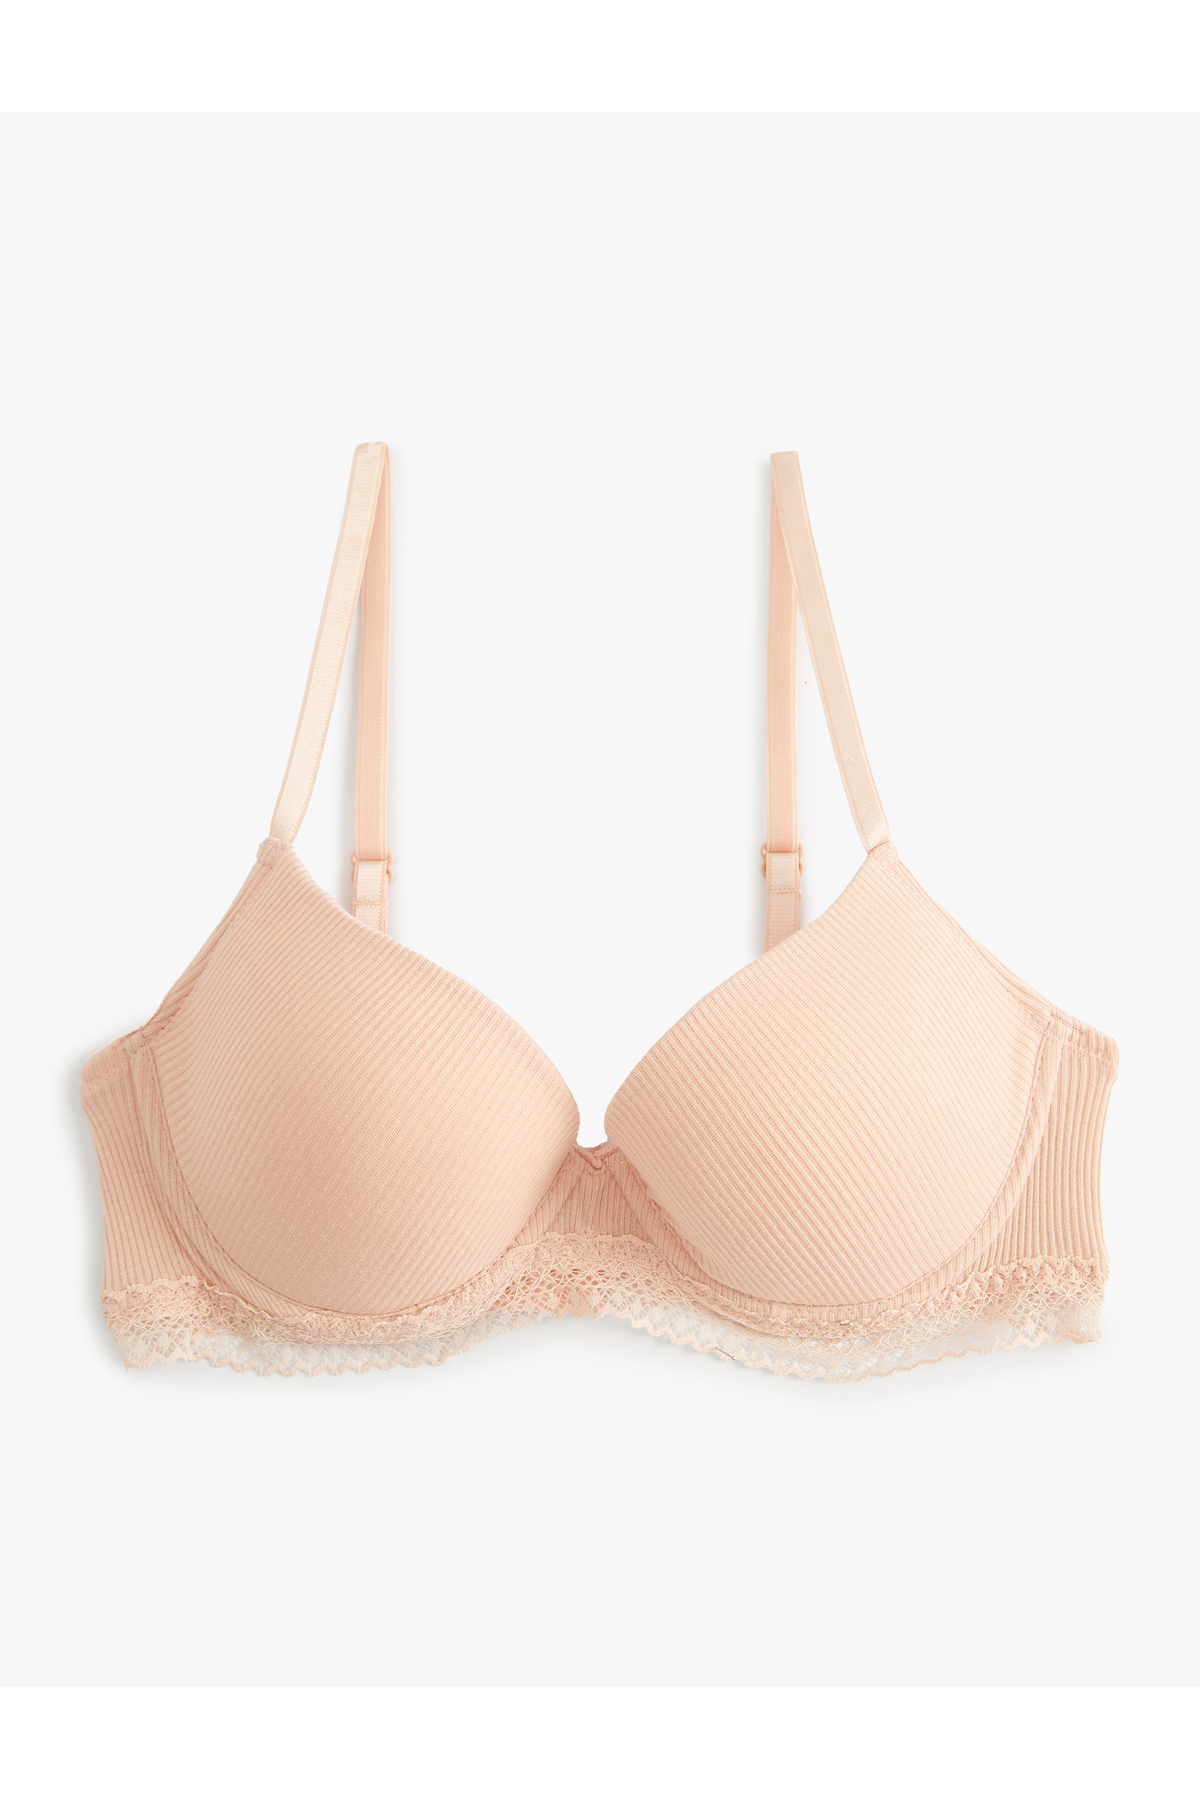 Levně Koton Push Up Bra Underwire Supported Filled Lace